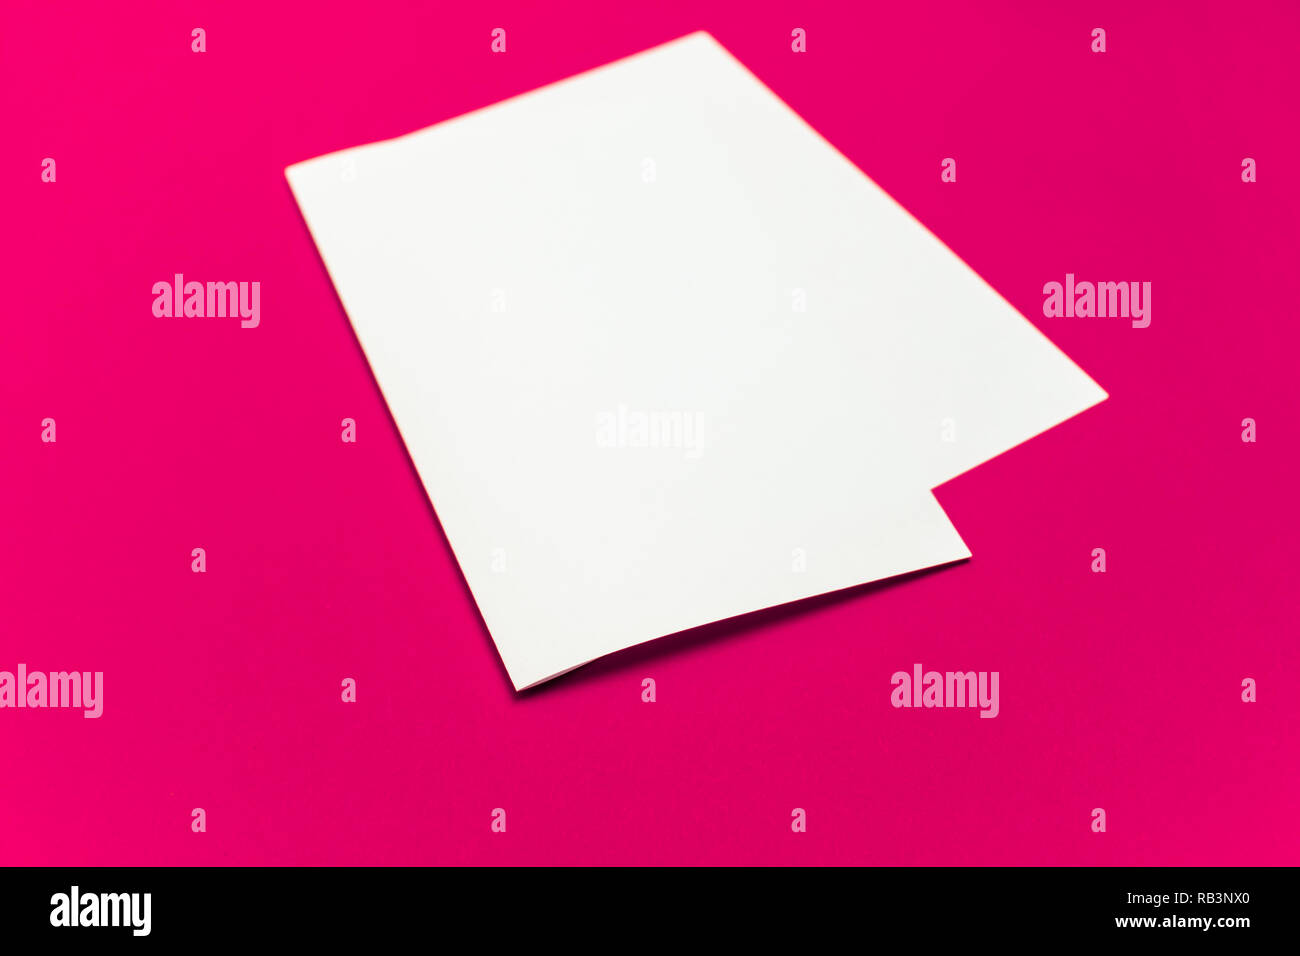 Blank paper sheet on 'plastic pink' colored background. Close-up view of bent white paper laying on bright table top Stock Photo